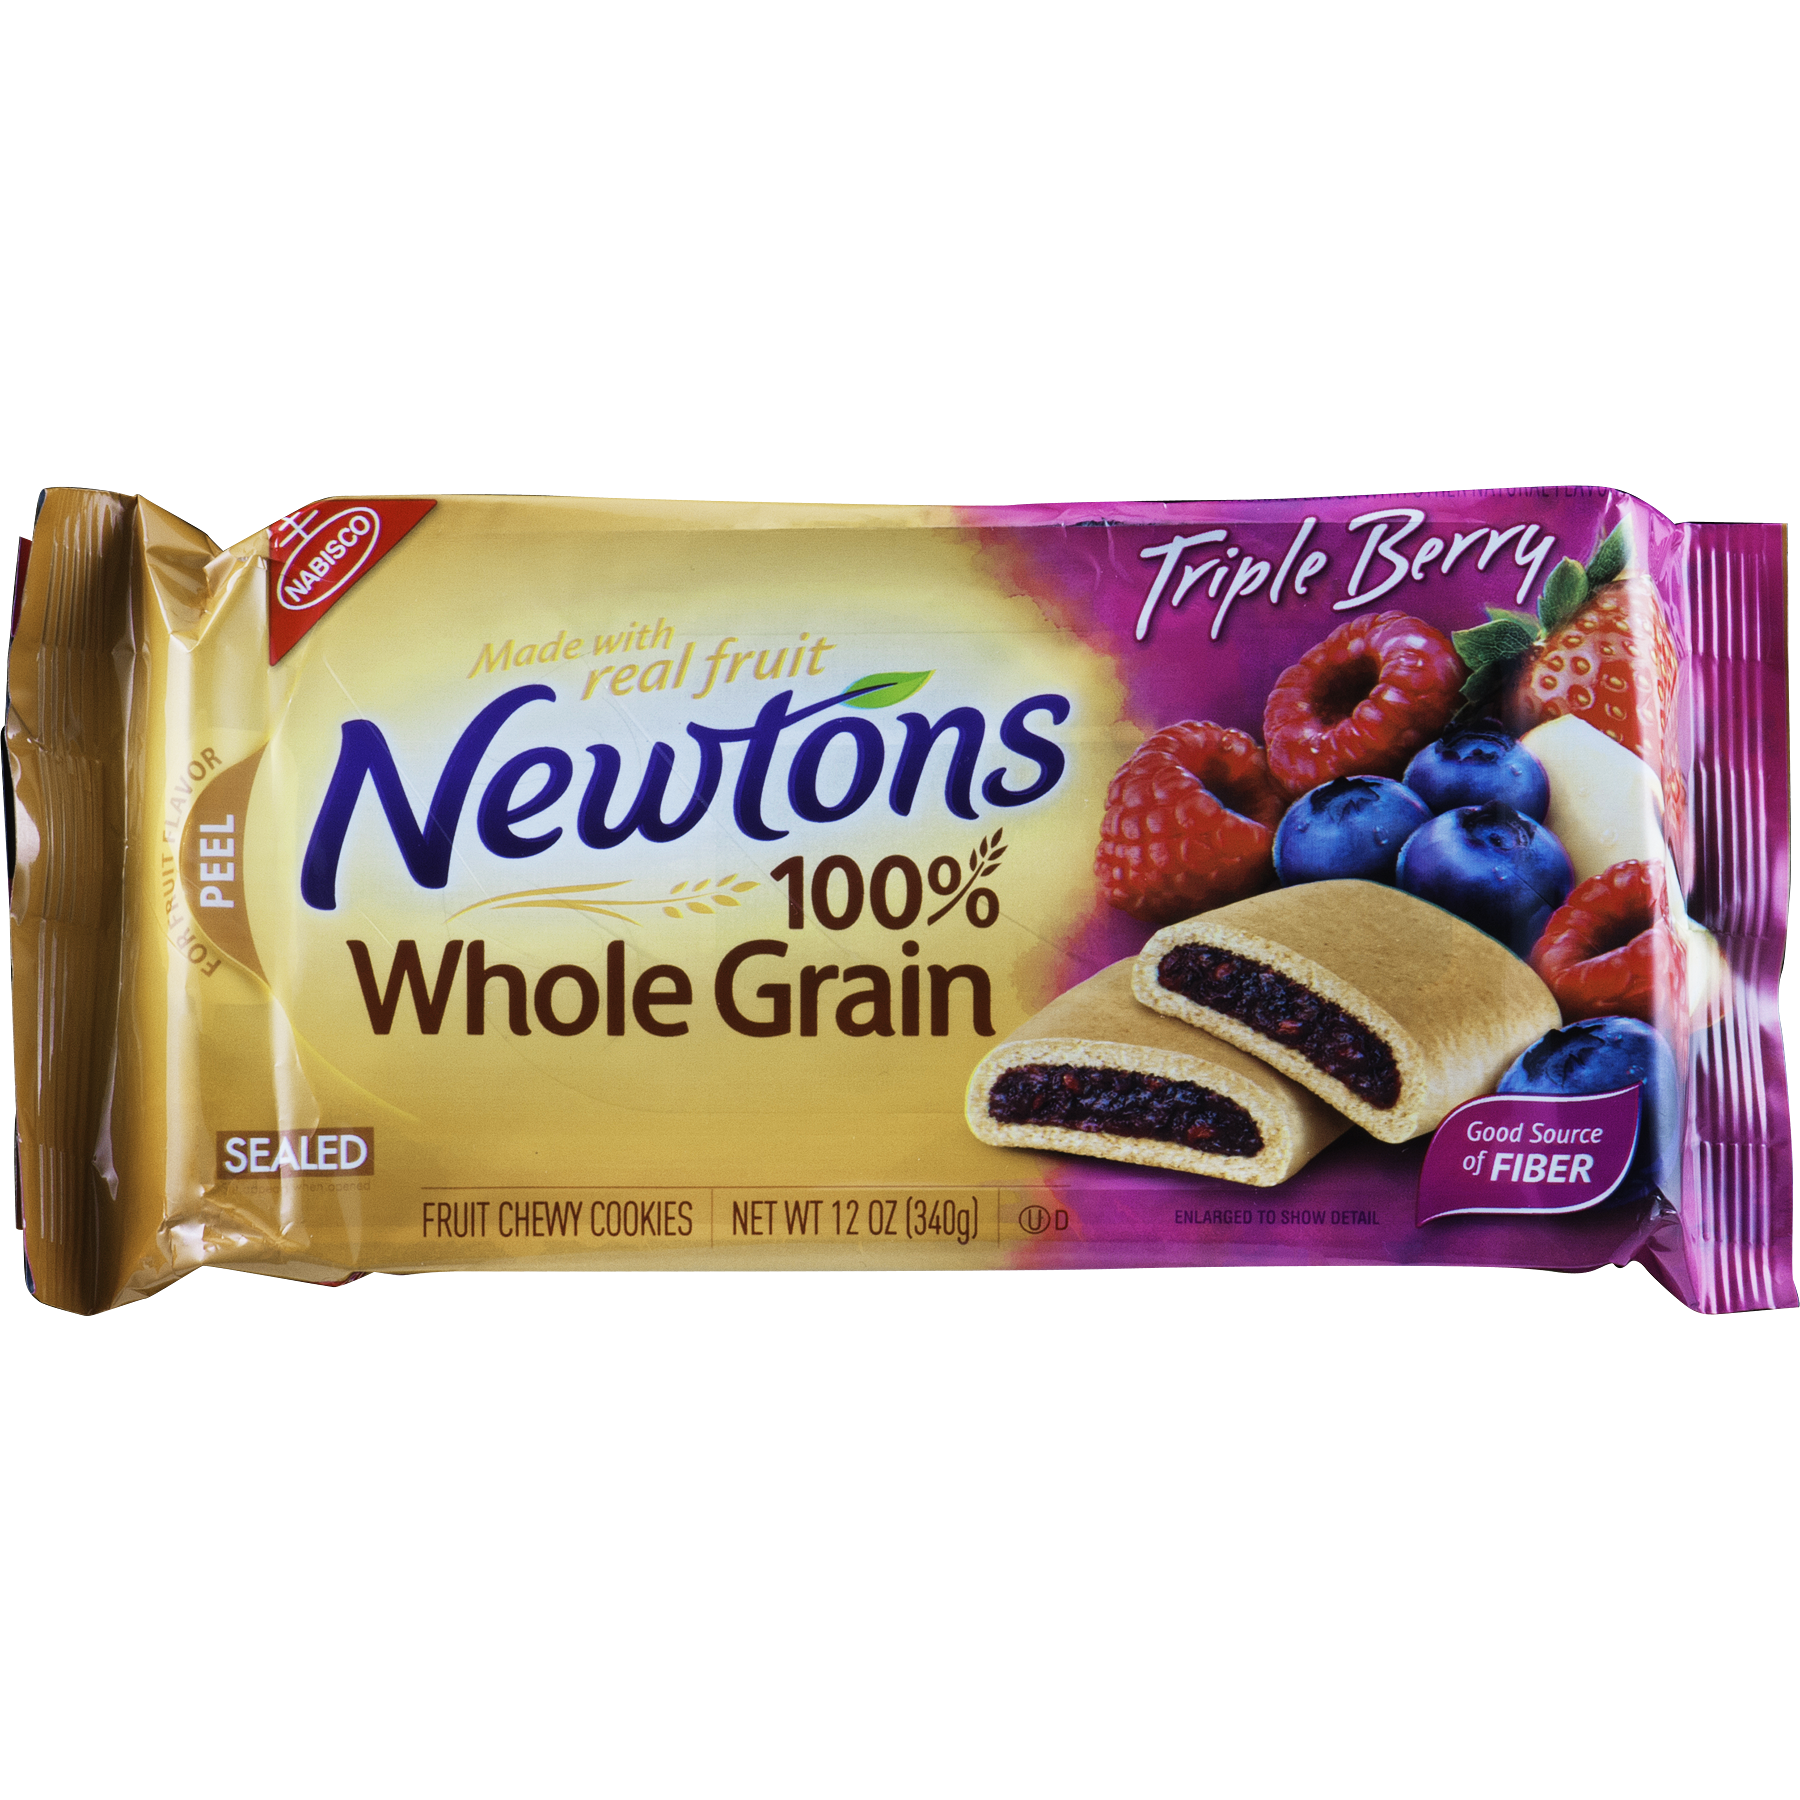 Nabisco Newtons Whole Triple Berry Chewy Cookies, 12 Oz. - image 4 of 6